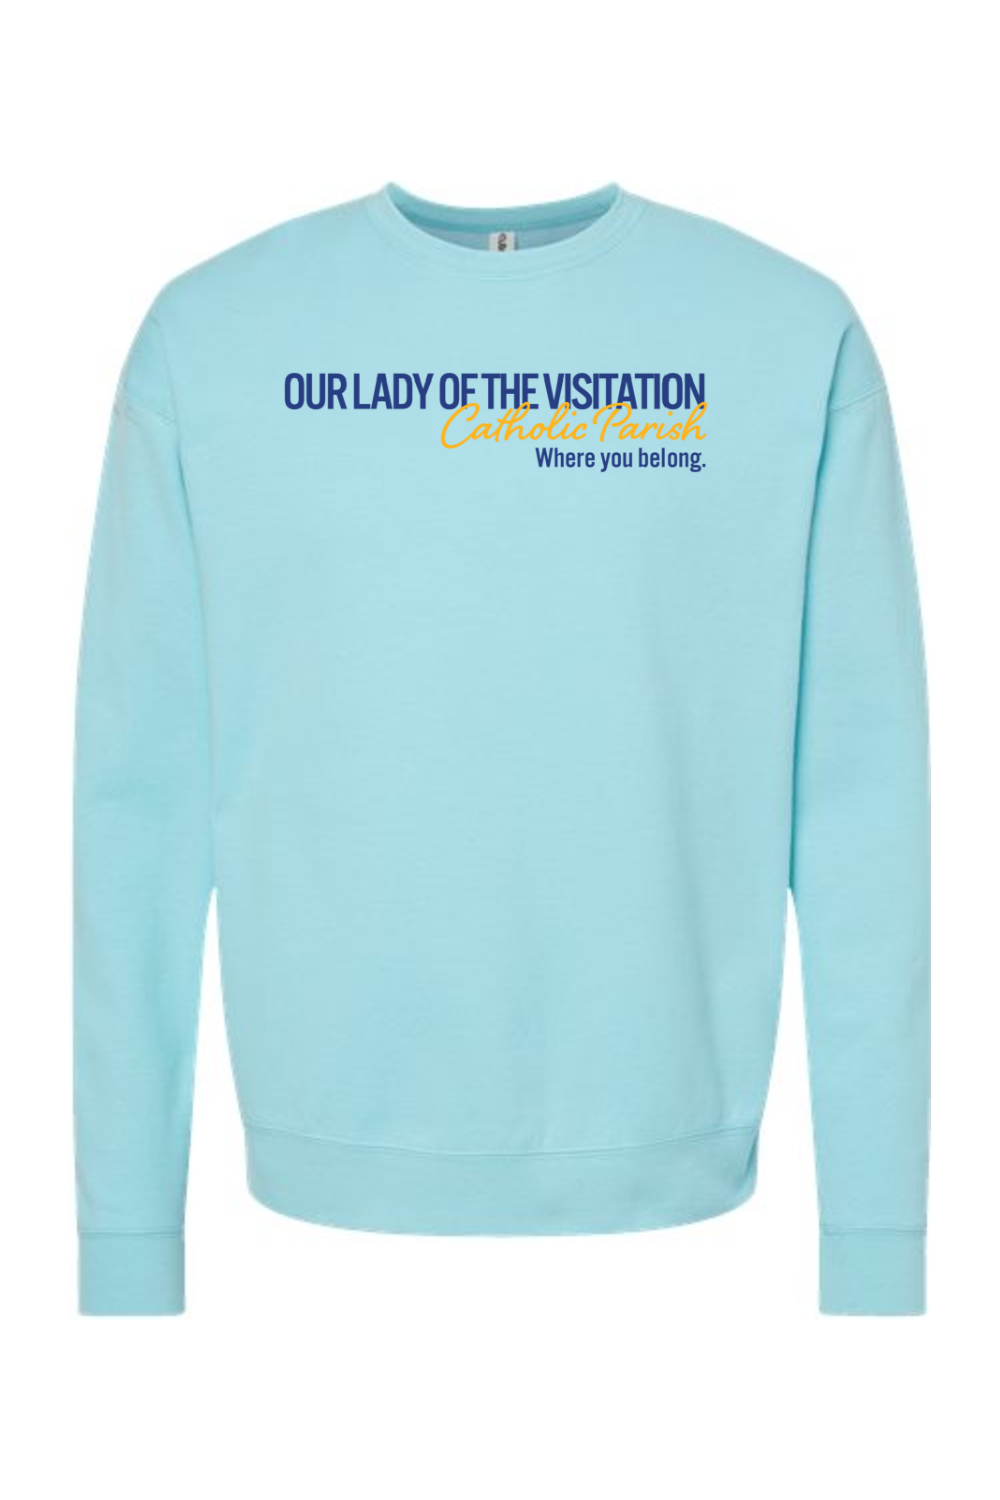 Our Lady of the Visitation Block Crewneck